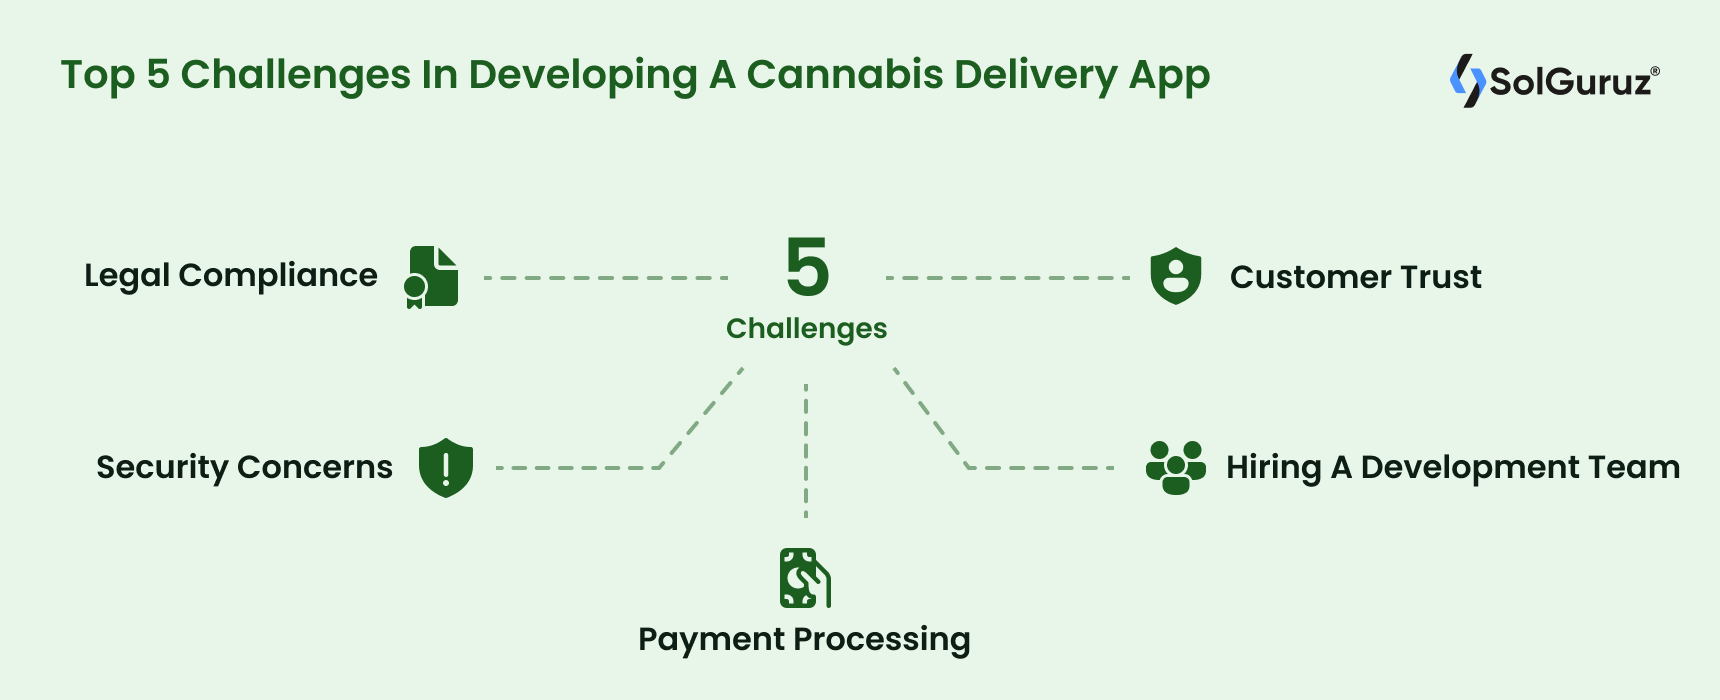 Top 5 Challenges In Developing A Cannabis Delivery App